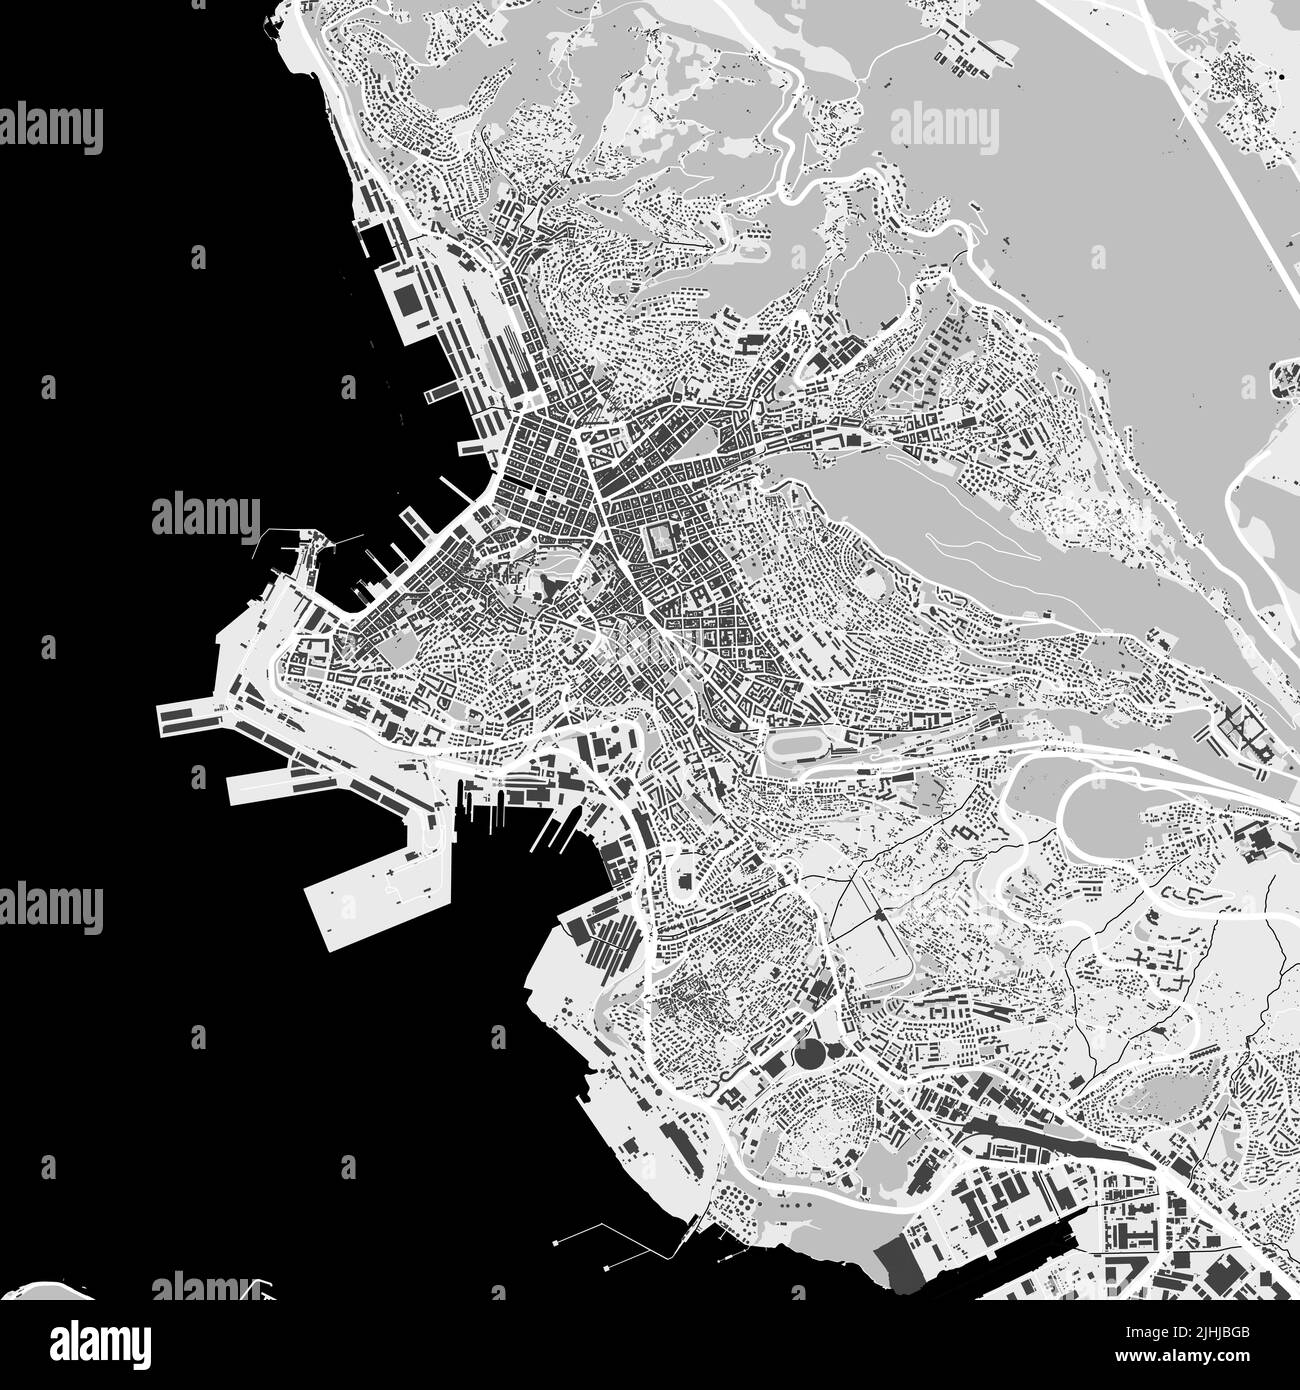 Urban city vector map of Trieste. Vector illustration, Trieste map grayscale black and white art poster. Street map image with roads, metropolitan cit Stock Vector